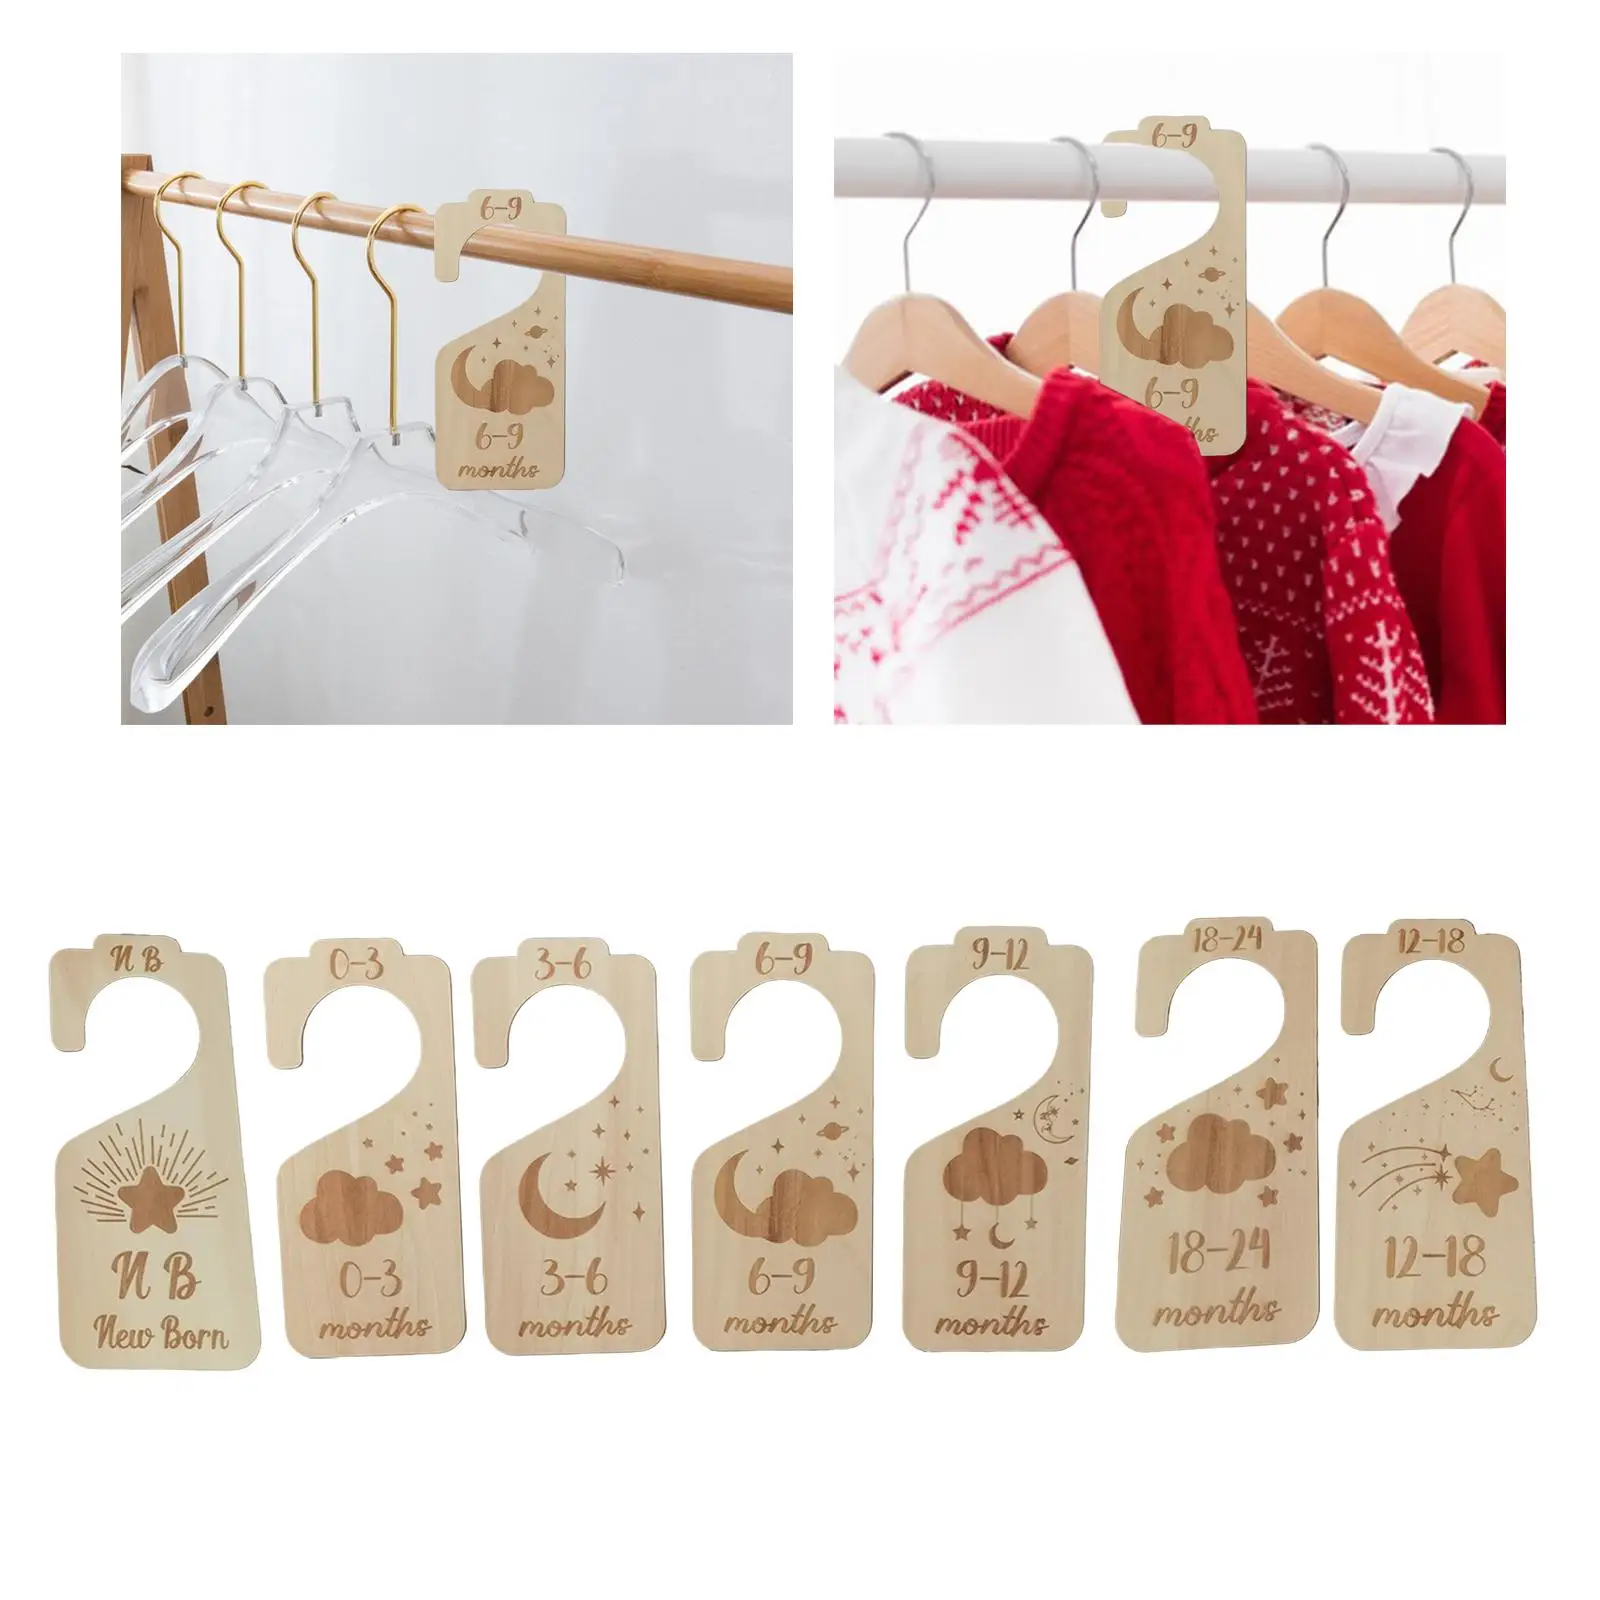 7Pcs Baby Closet Dividers from Newborn to 24 Months Wood Hanger Dividers Cloth Size Organizers for Bedroom Living Room Mom Gifts